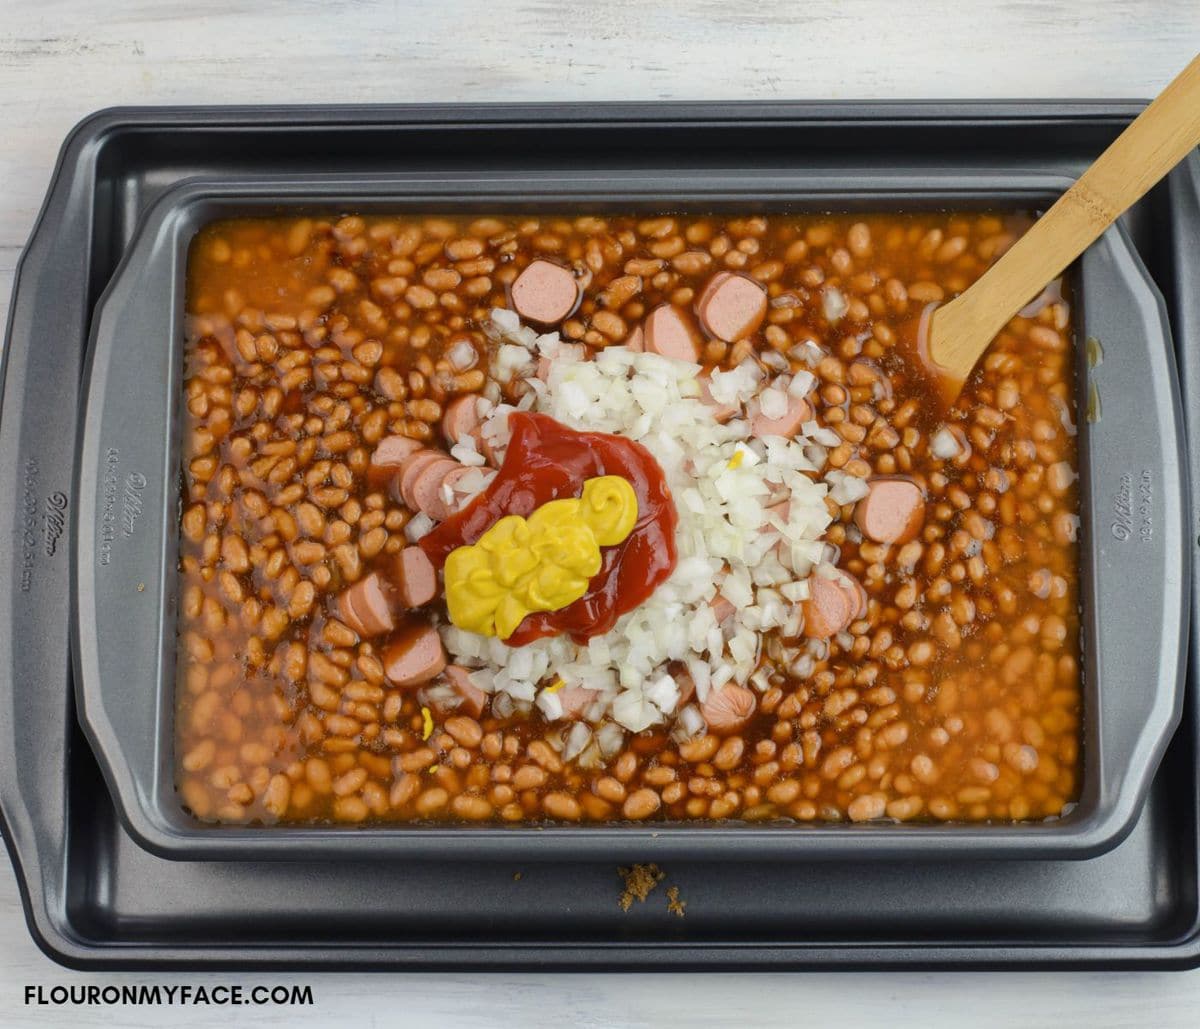 Combining the baked beans ingredients in a large baking pan.